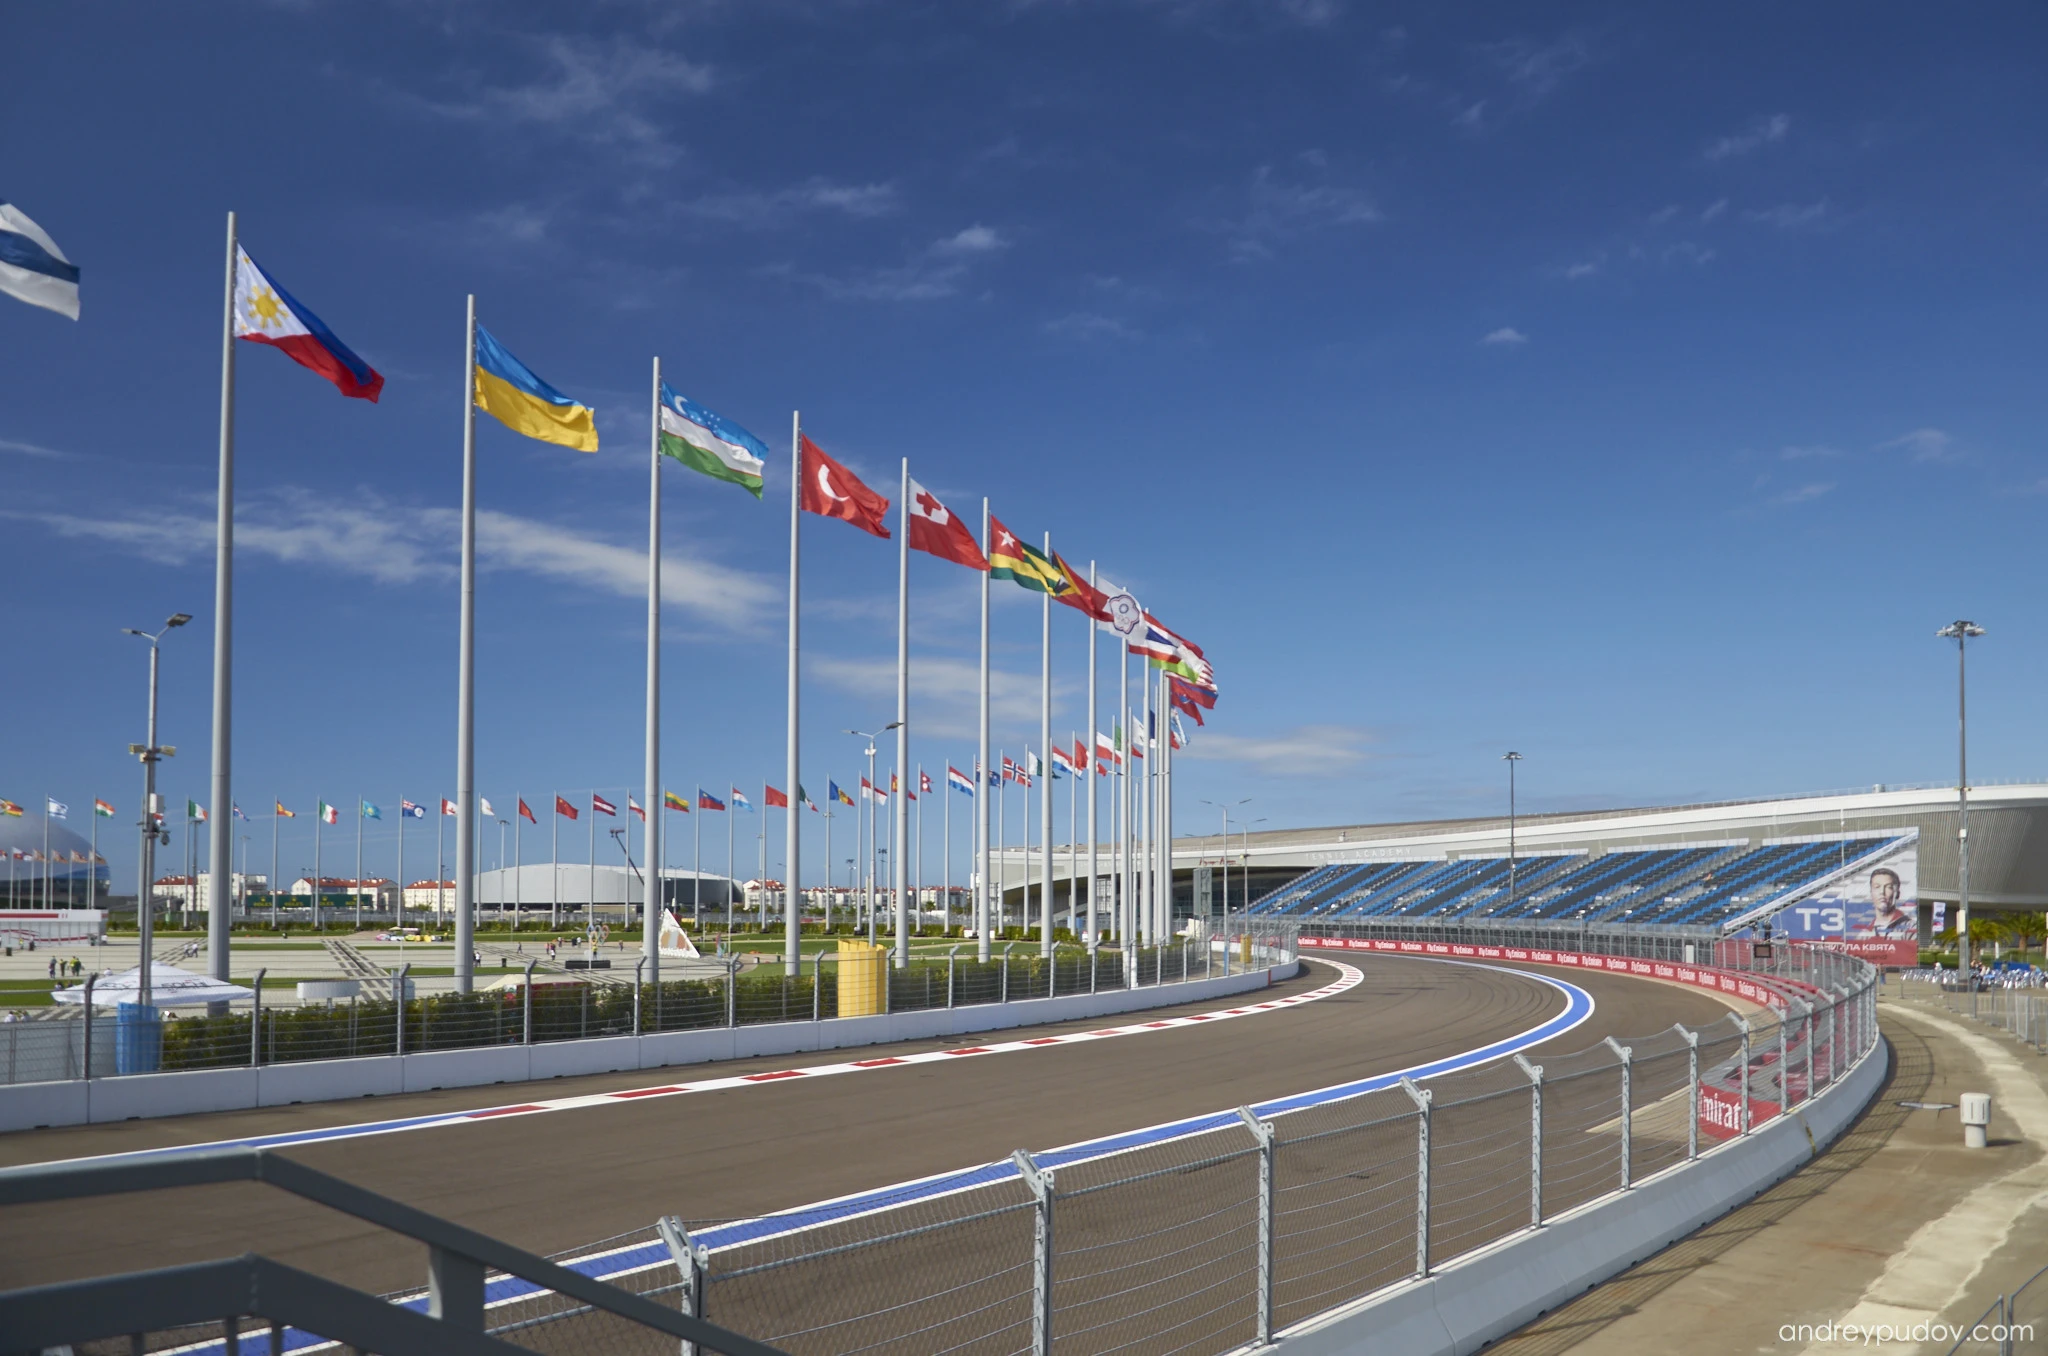 2015 Formula 1 Russian Grand Prix - The circuit is similar to the Beijing Olympic Green Circuit and the Sydney Olympic Park Circuit in that it runs around a former Olympic complex; in this case, the Sochi Olympic Park site, scene of the 2014 Winter Olympic Games. The inaugural World Championship Russian Grand Prix took place in 2014, beginning a seven-year contract.

Also, the TCR International Series raced at Sochi in 2015-2016, with the TCR Russian Series and SMP F4 Championship as support series.